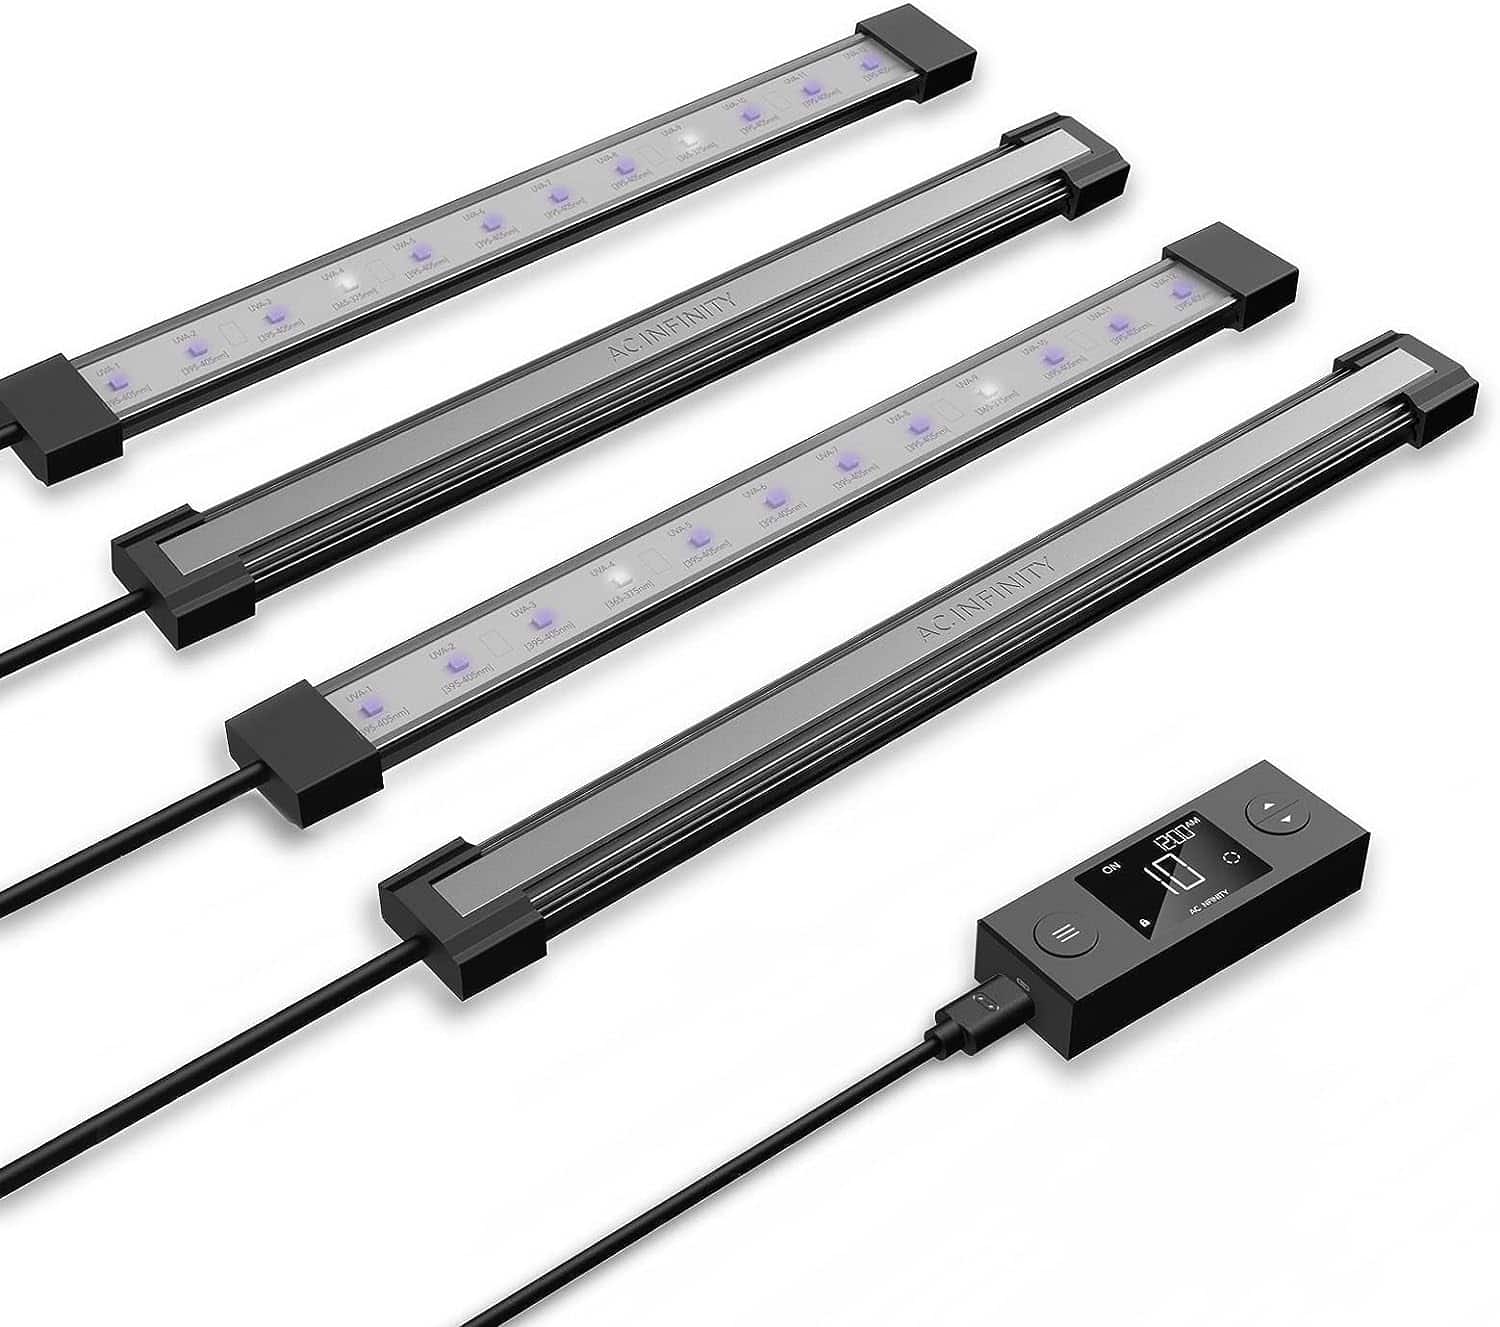 AC Infinity IONBEAM U4, Targeted Spectrum UV LED Grow Light Bars 11”, 4-Bar Lighting Kit with 365nm and 395nm Diodes, Digital Dimming Schedule Controller, for Indoor Plants, Grow Tents, Greenhouses